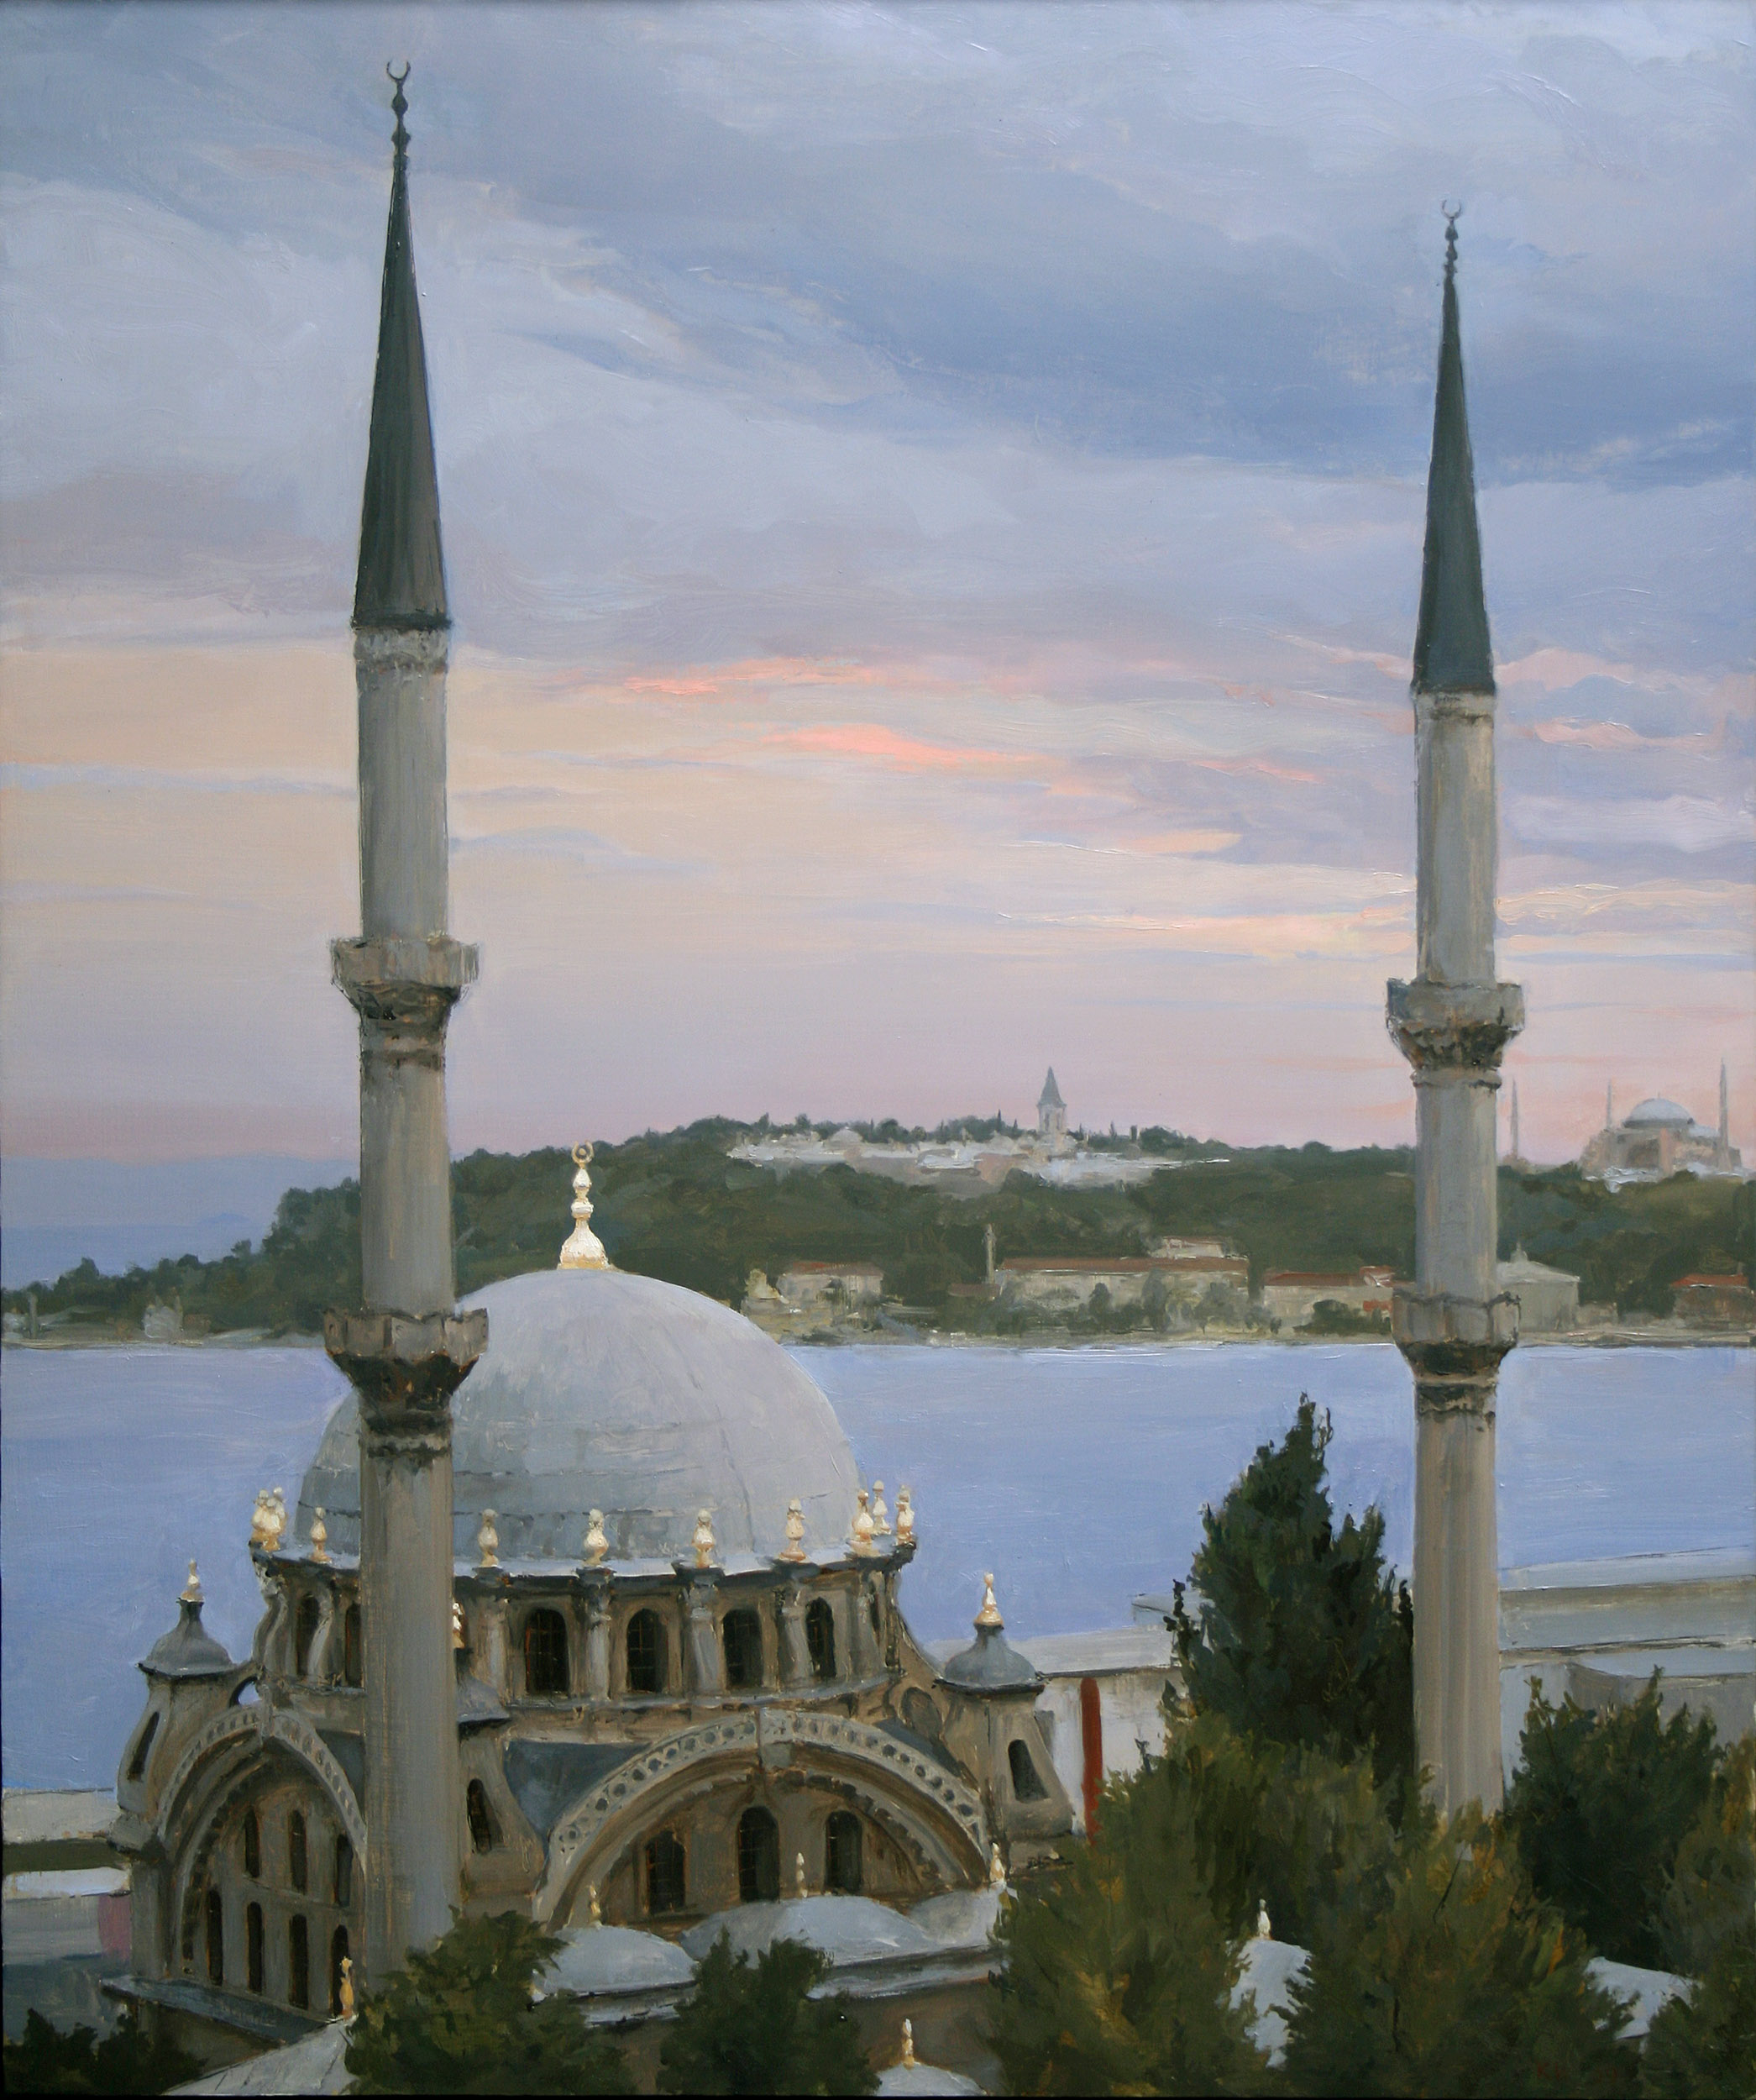 Kenny Harris, "Nusretiye Mosque with Old City," 24 x 20 inches, Oil on panel 